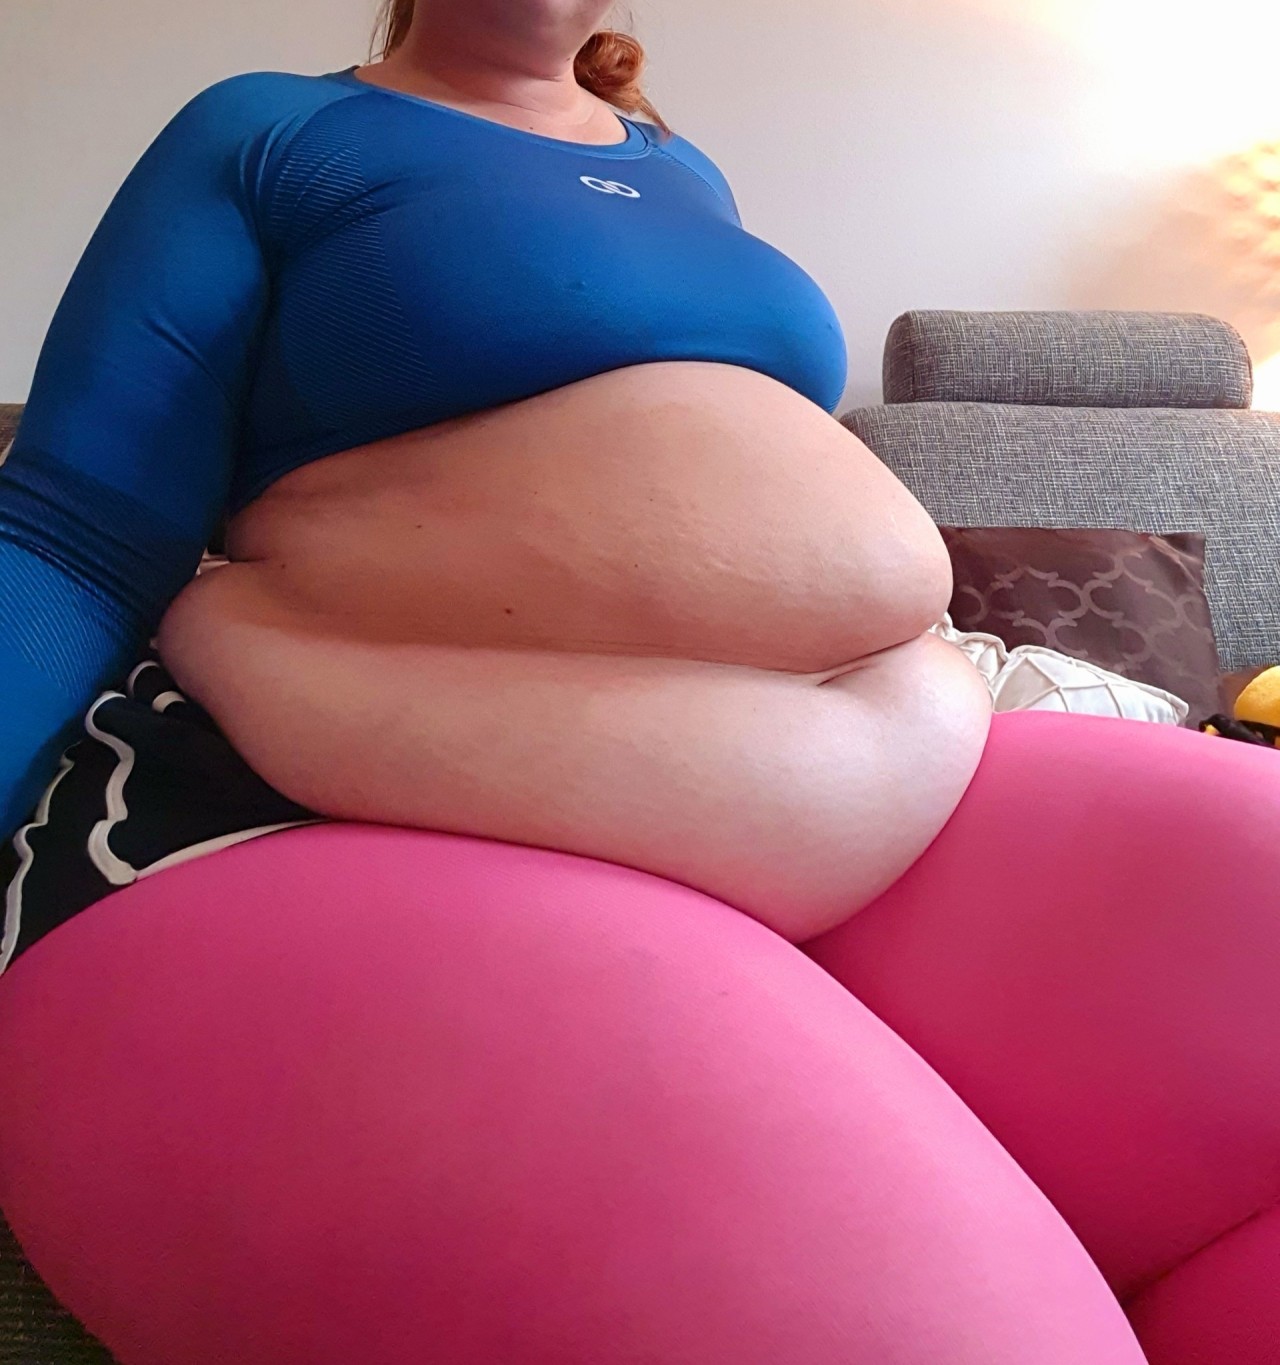 Sex hotsummerfatty-reloaded:Not only my belly pictures